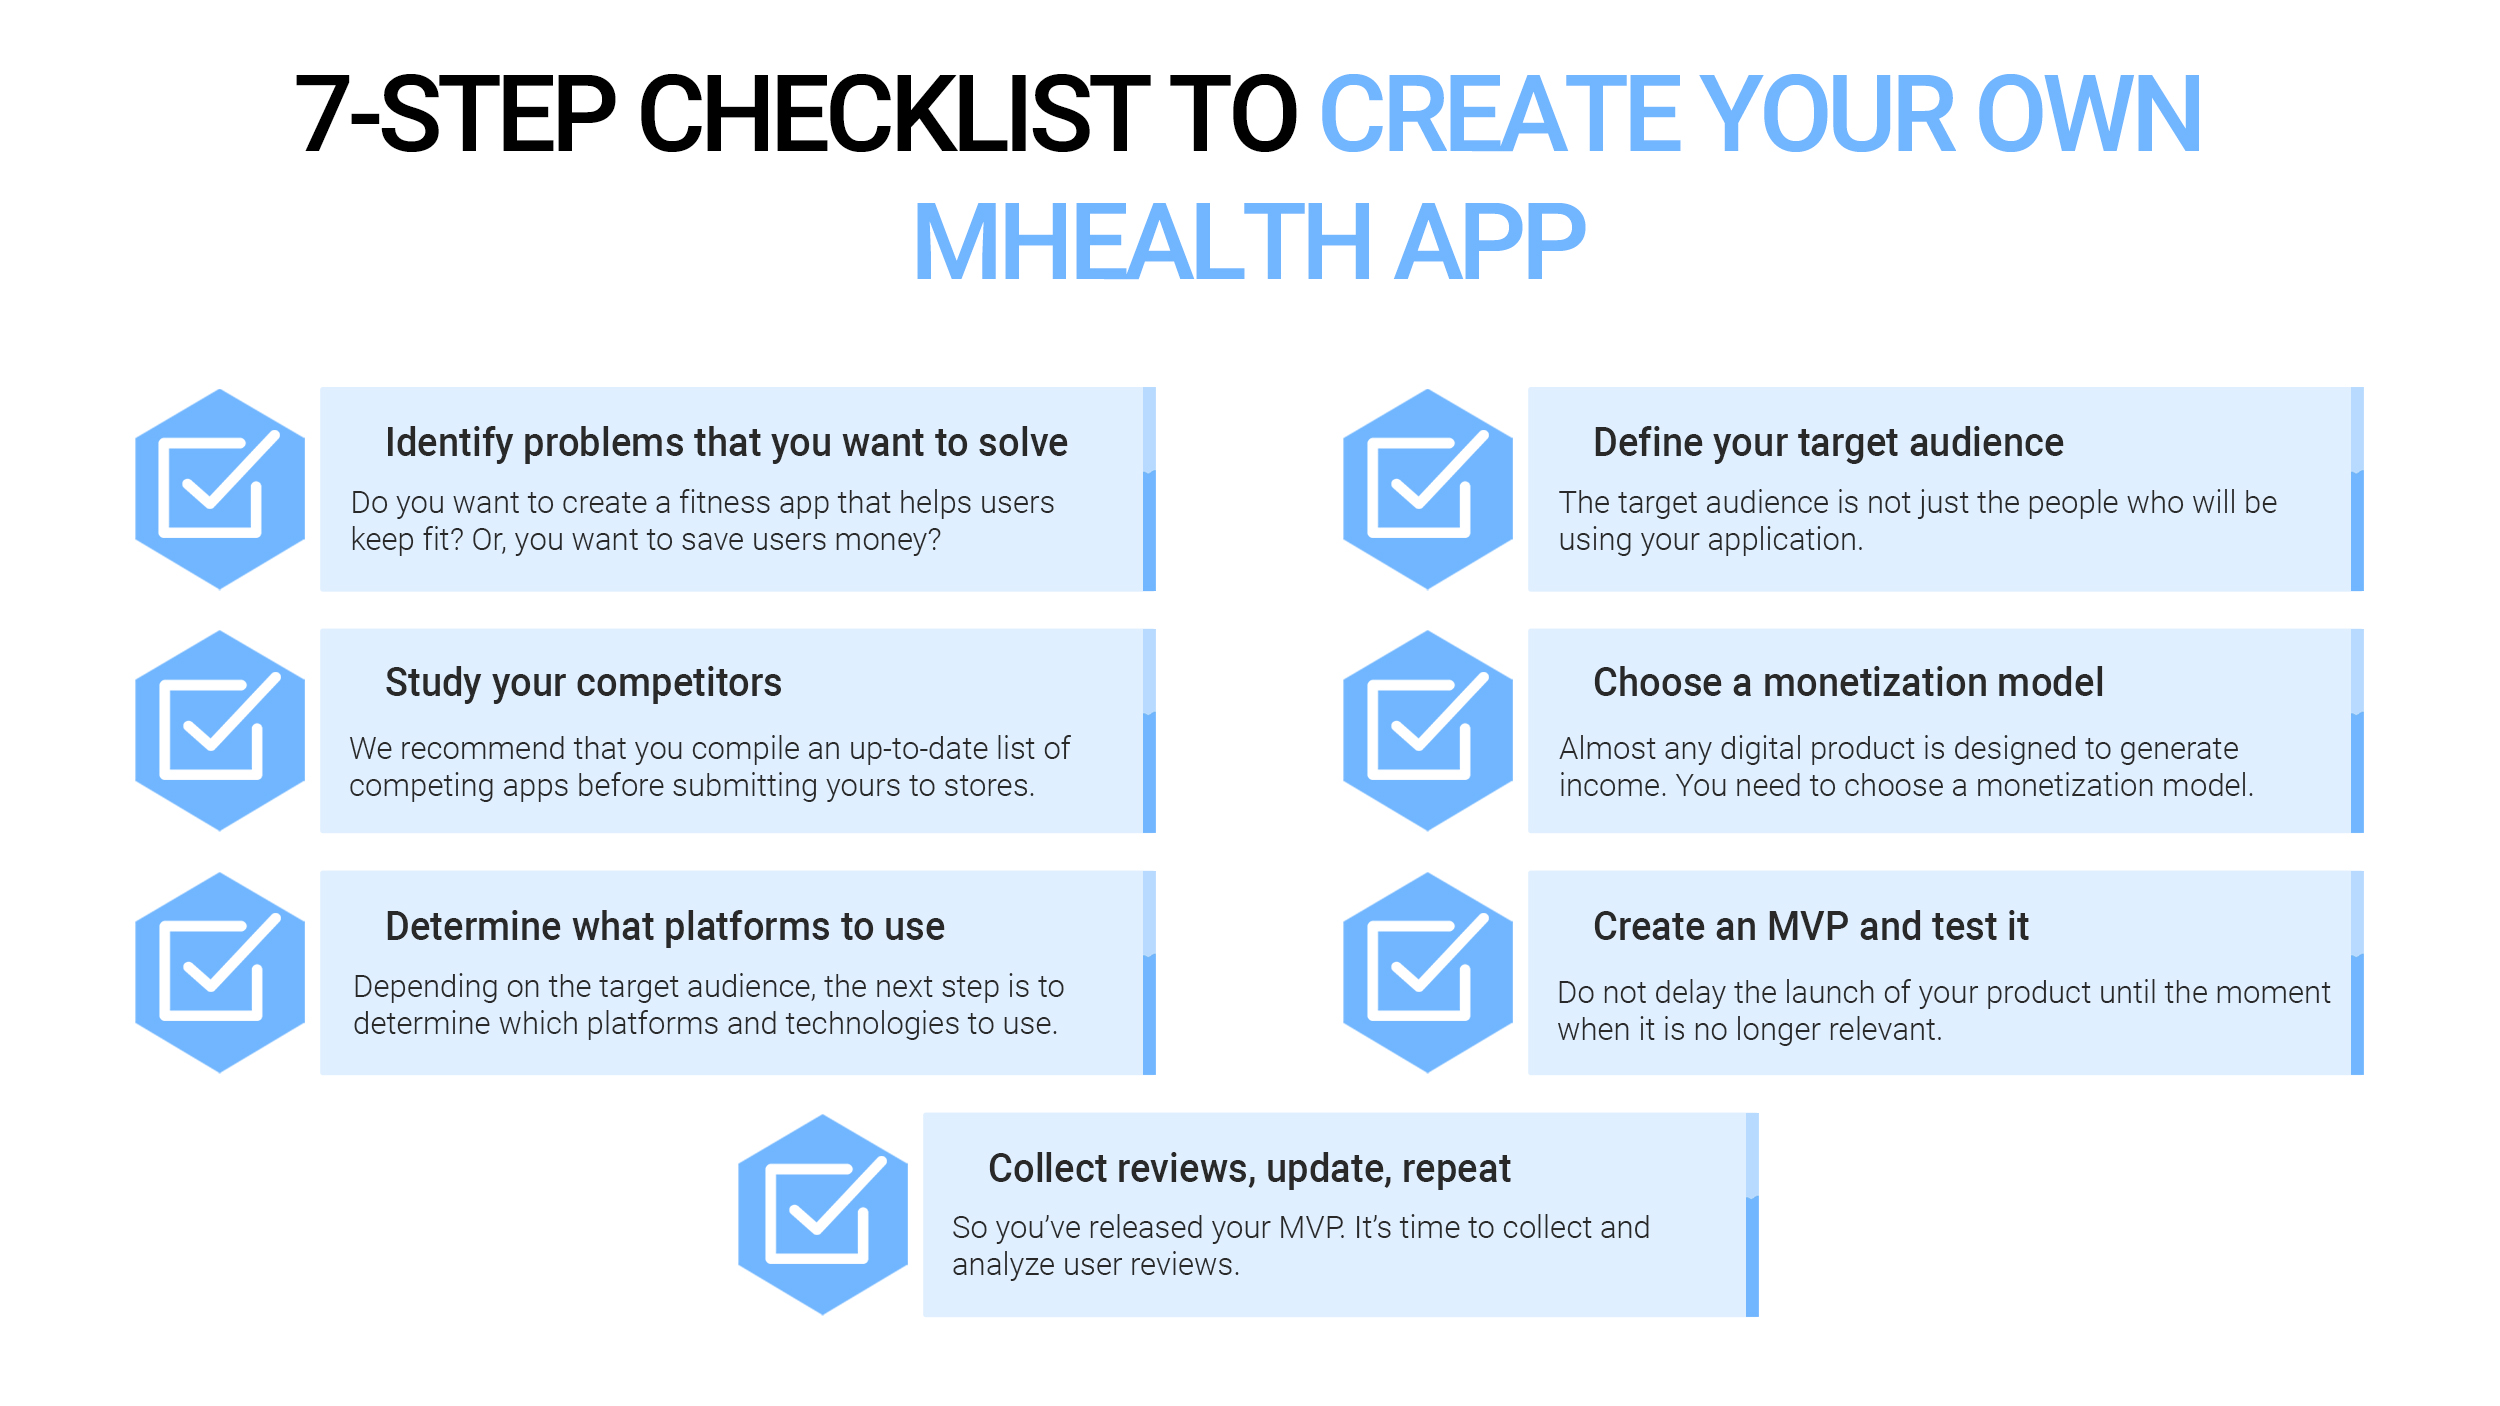 7-step checklist to create your own mHealth app